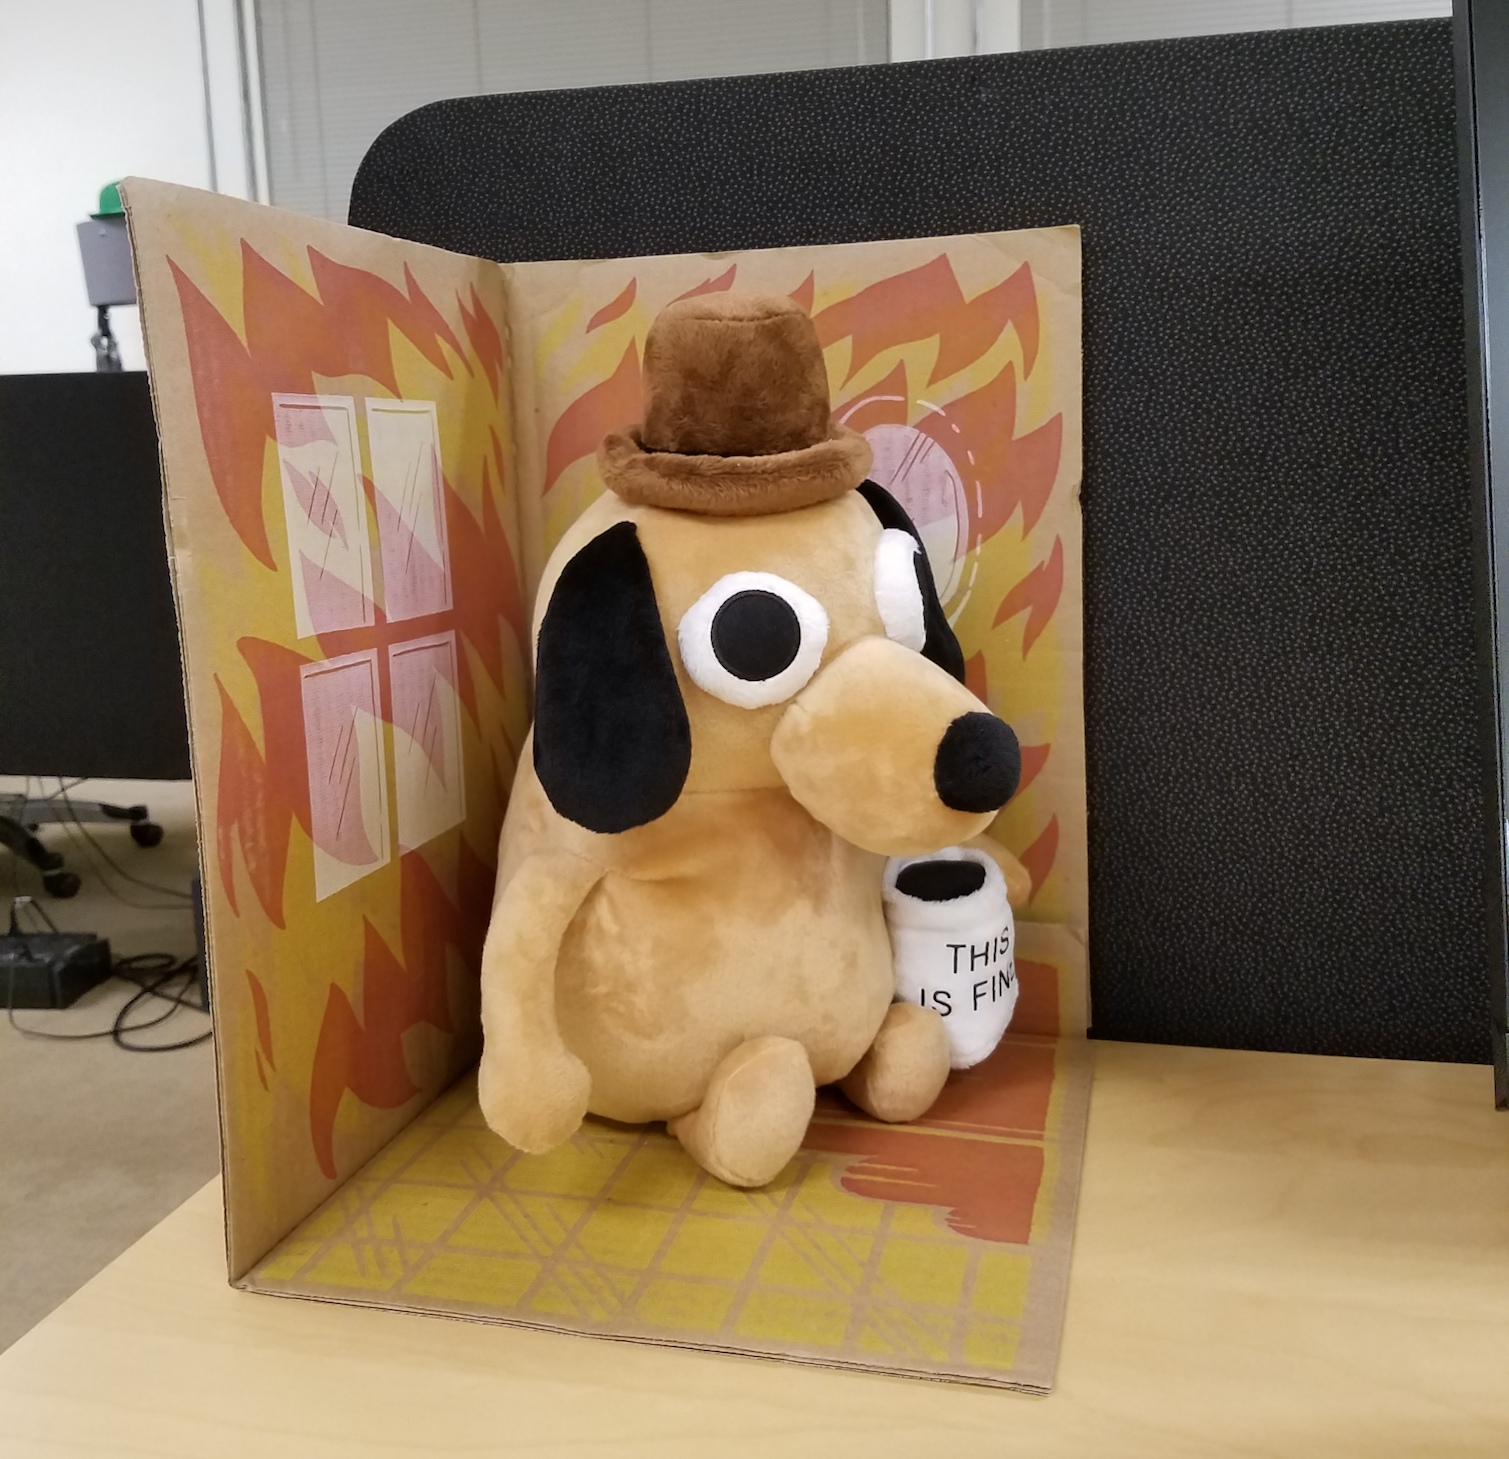 Stuffed dog holding a mug that says 'This is Fine', in a cardboard house with flame pattern